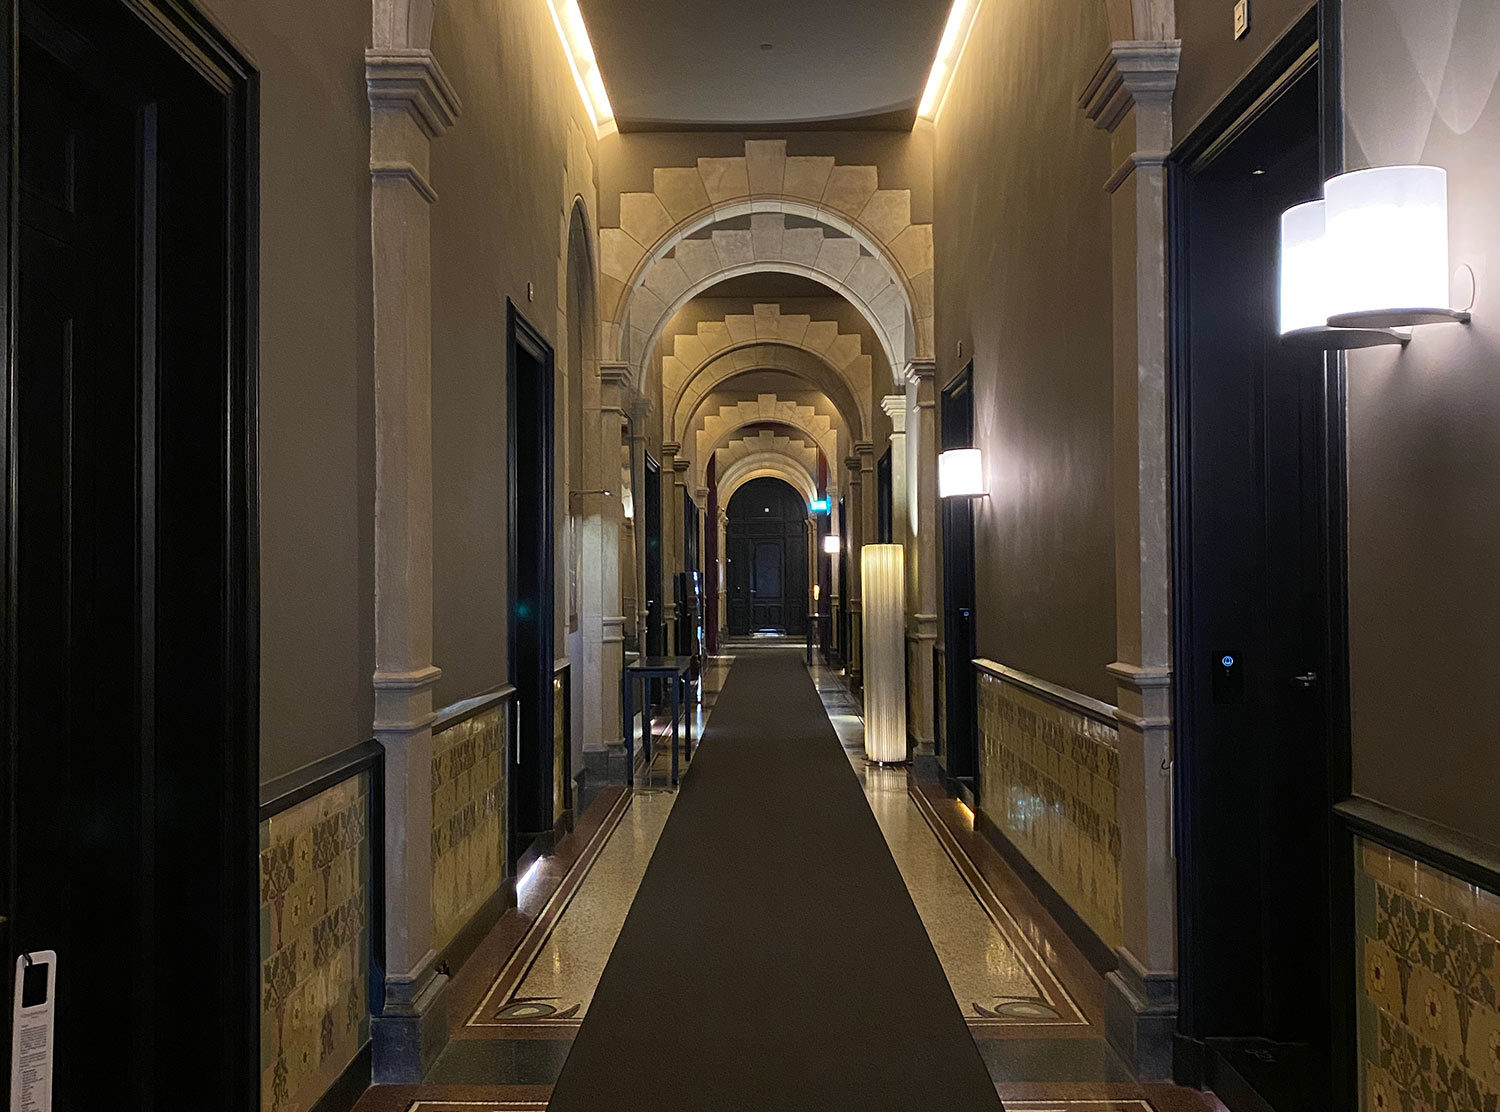 Conservatorium Hotel A hallway that is a statement all on it's own